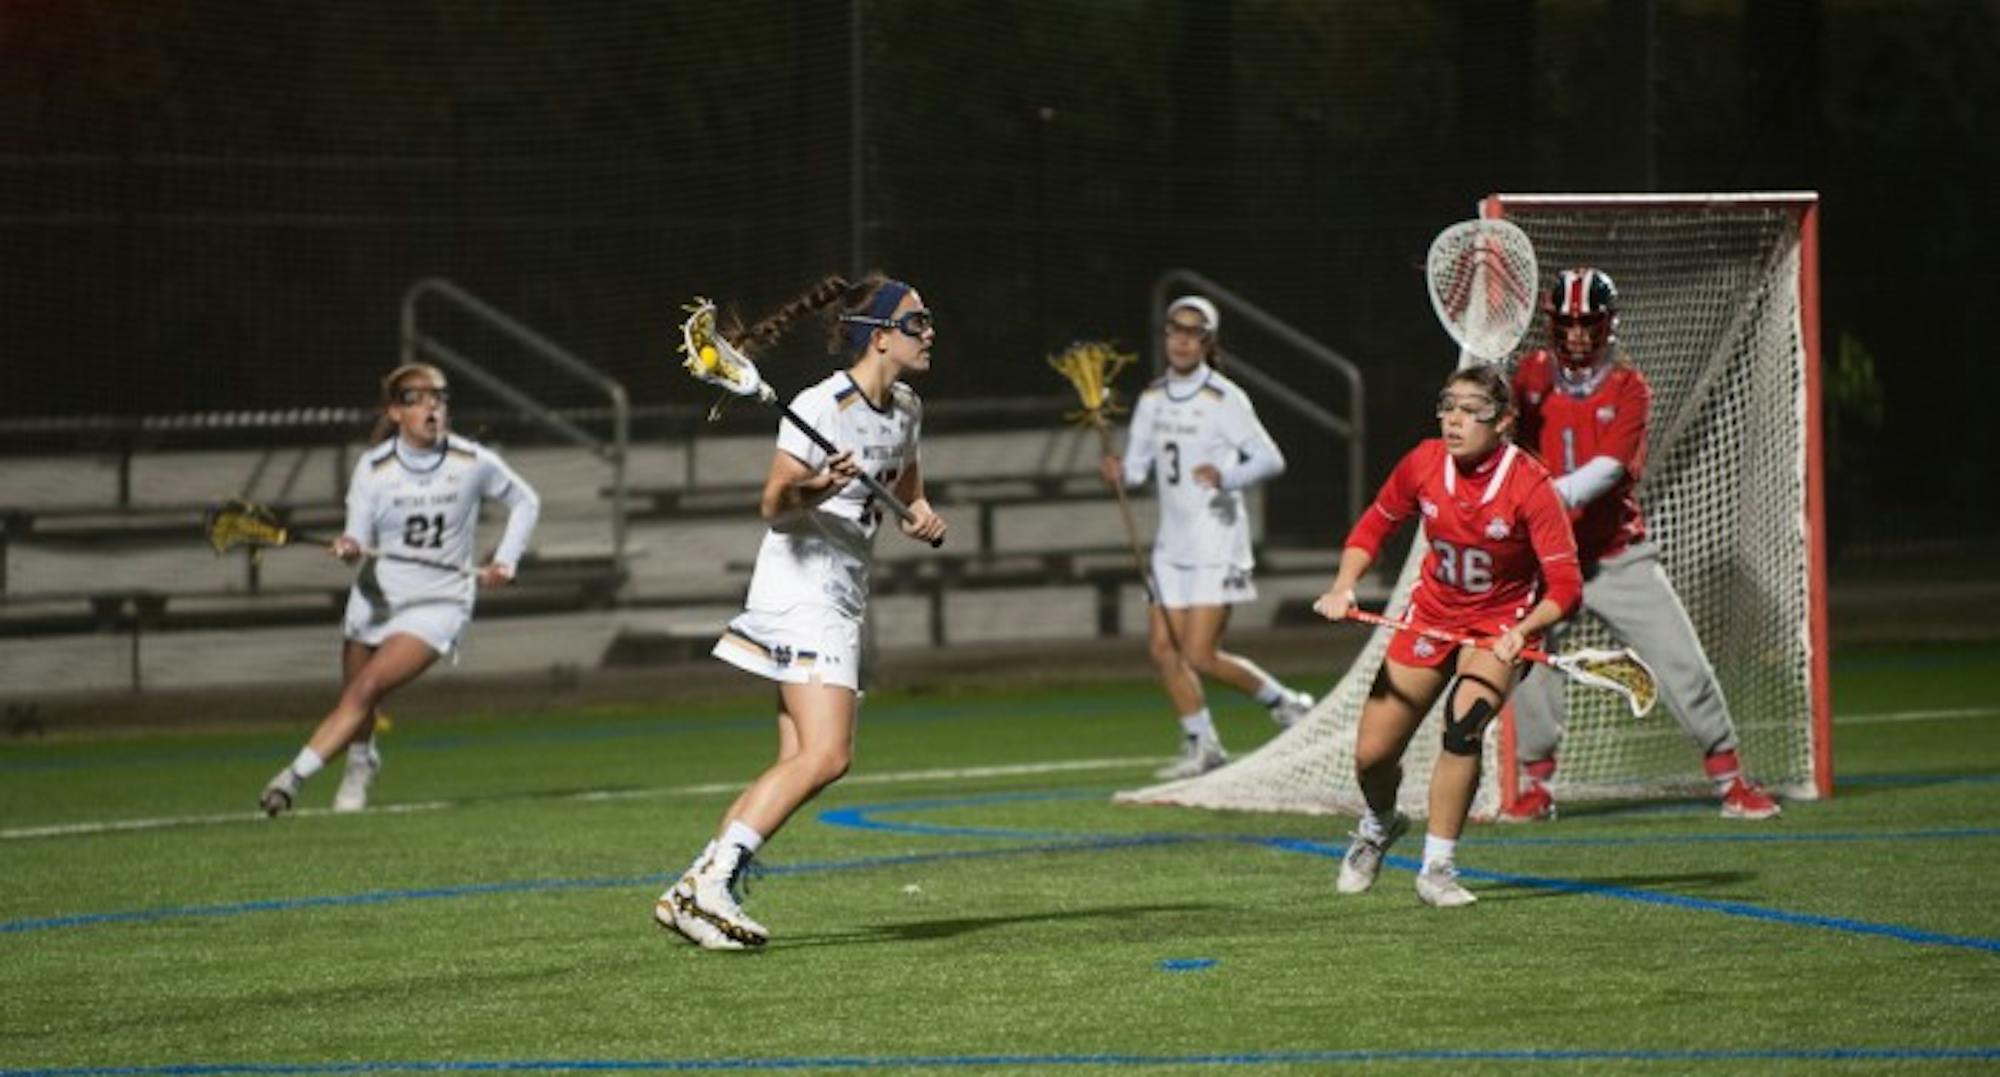 Irish senior attack Cortney Fortunato looks for an opporunity to score during Notre Dame’s 16-13 win over Ohio State on March 7 at Arlotta Stadium. Fortunato three of Notre Dame’s nine goals against UNC.